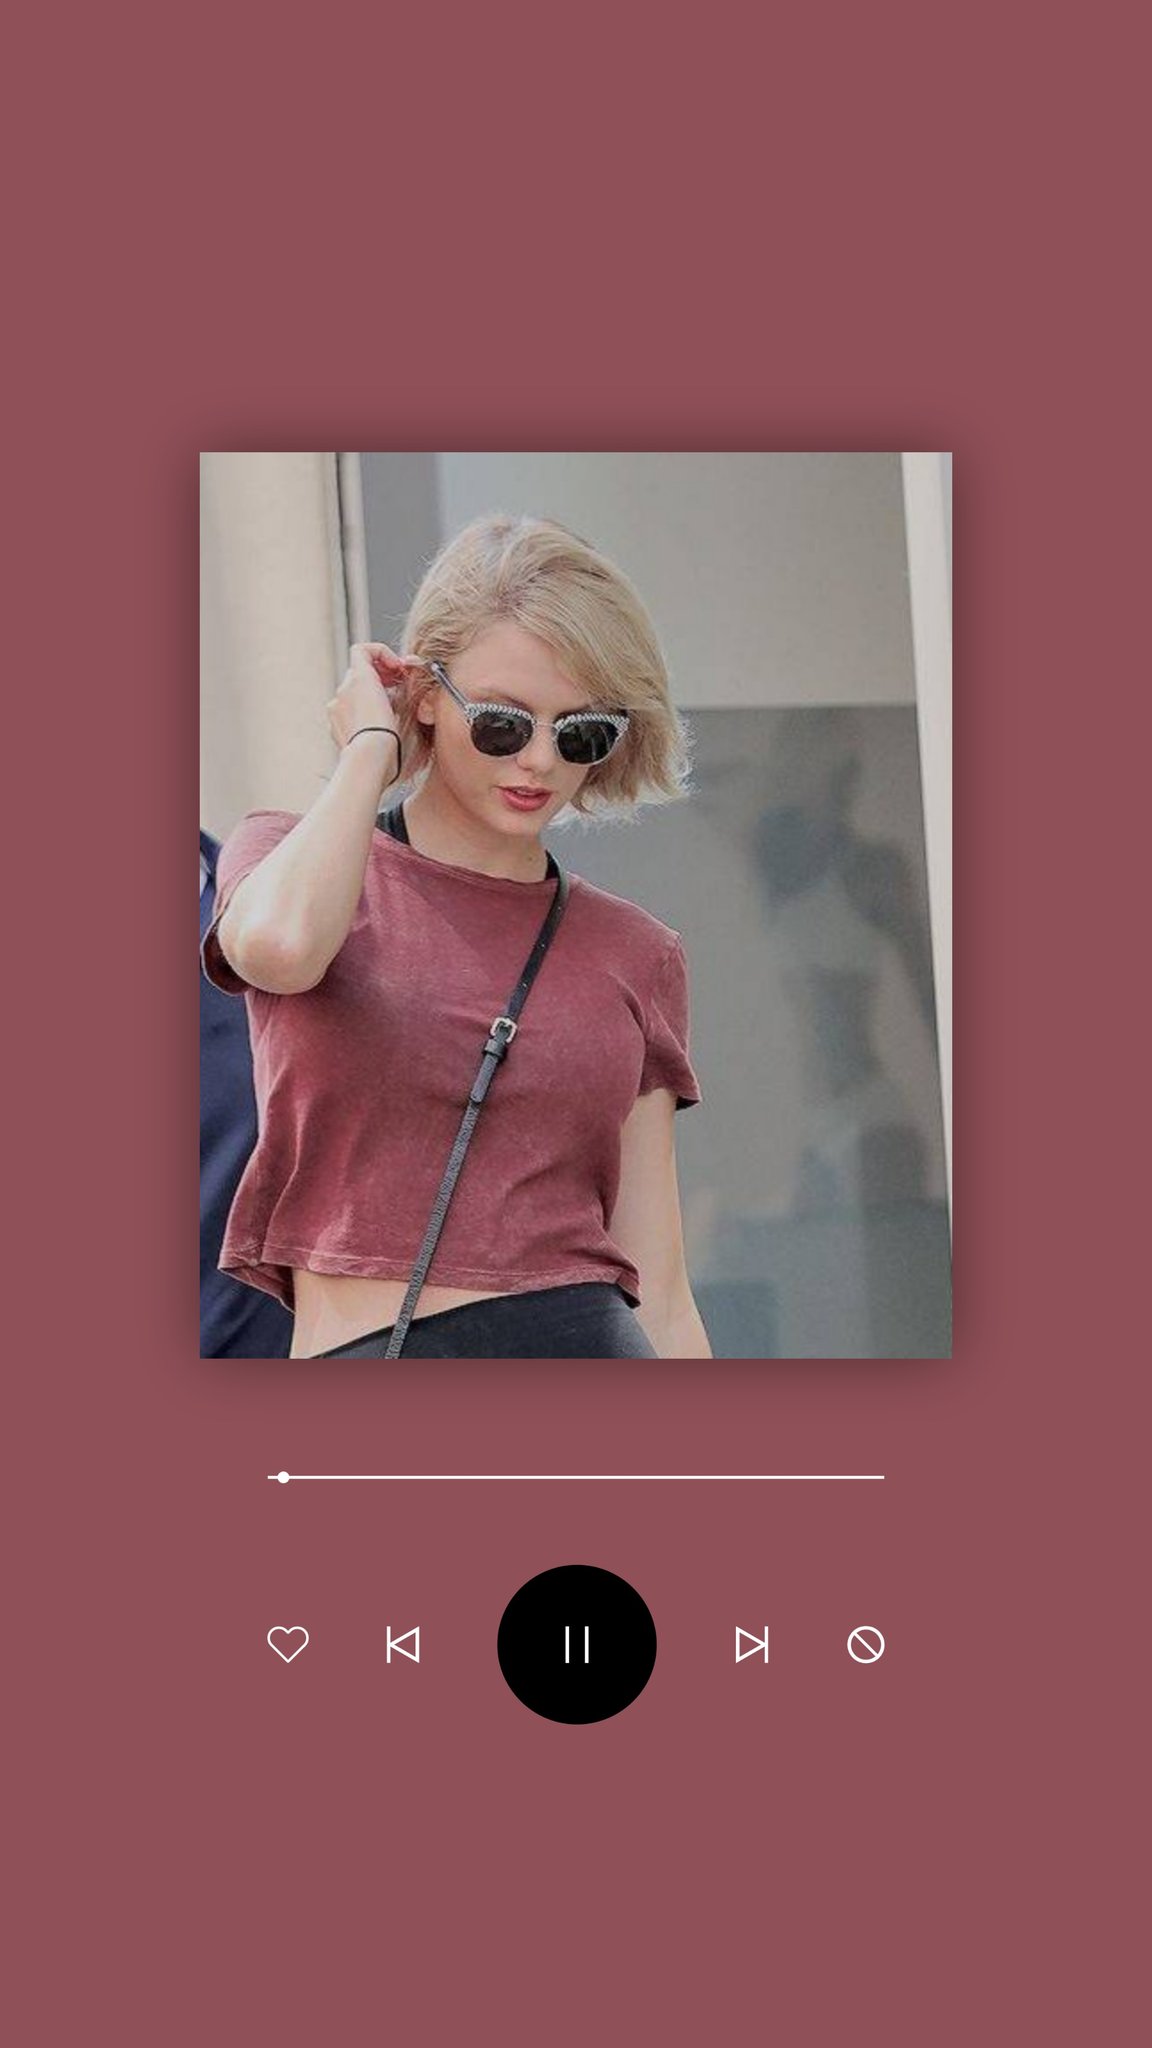 Mao A Twitter Taylor Swift壁紙配布 良いなと思った方 していただけると飛んで喜びます Taylorswift 壁紙 Wallpapers 加工 T Co Ytc0shv5cn Twitter